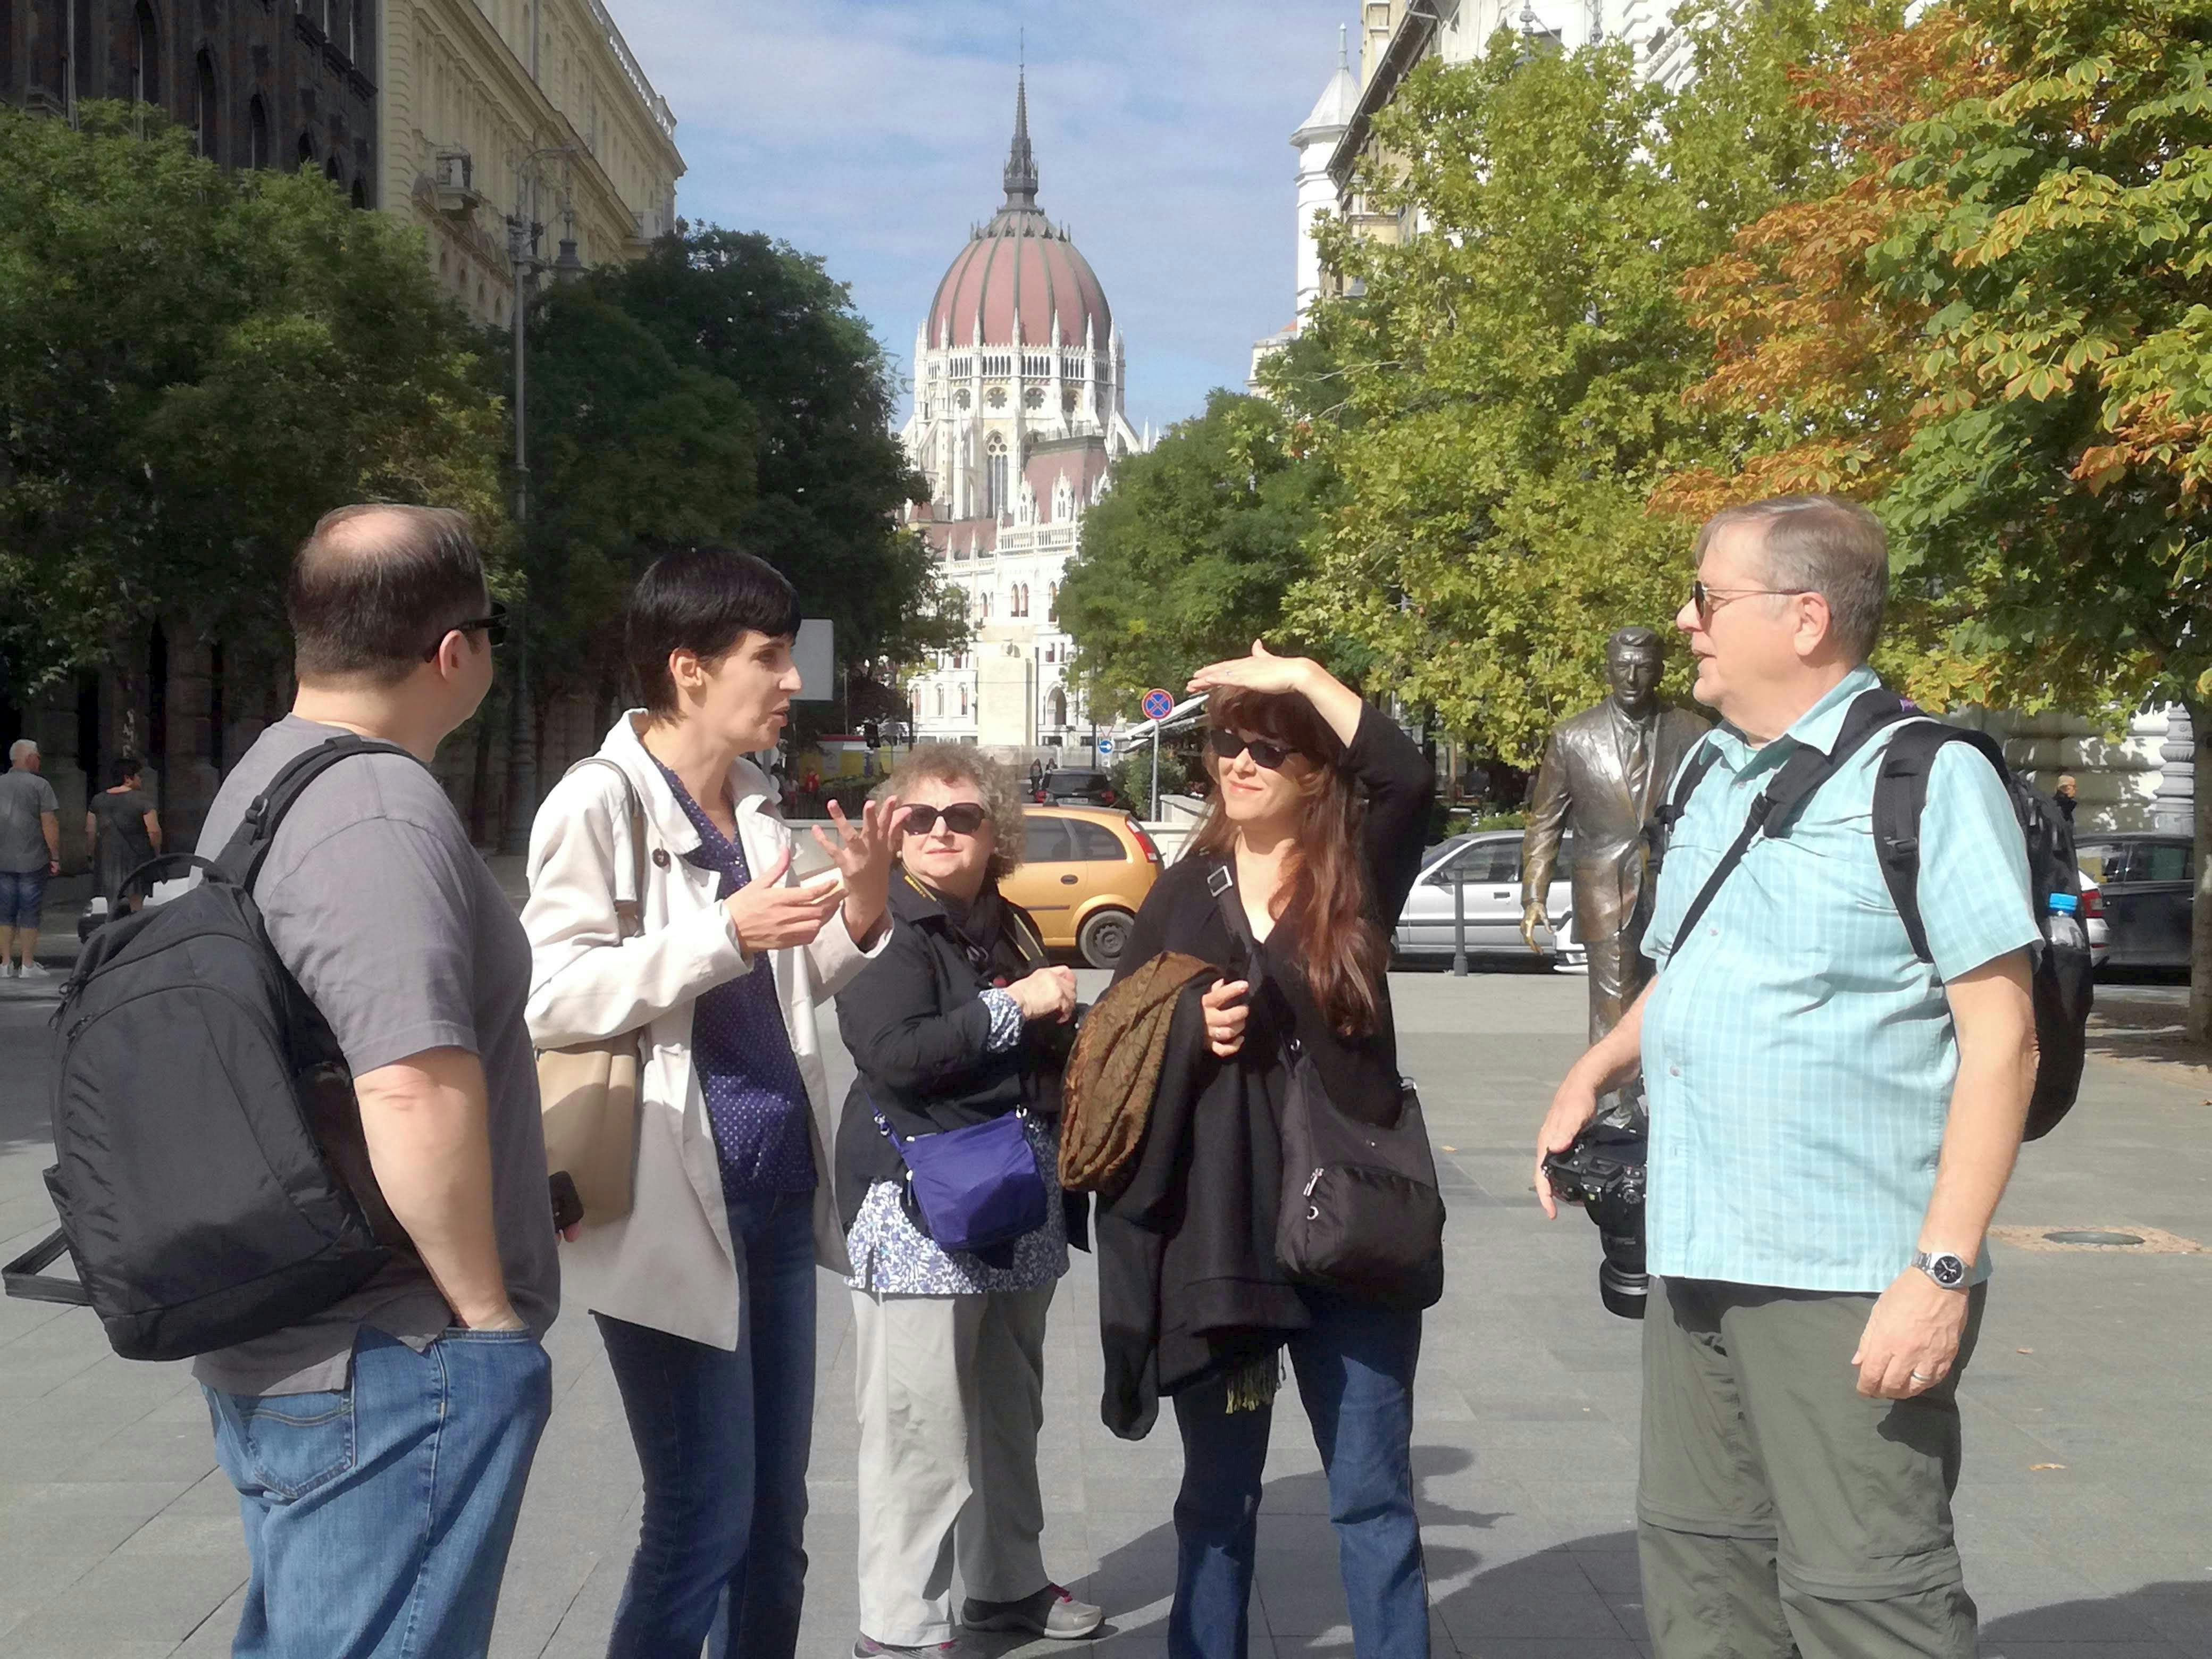 Downtown Pest: The New Imperial Capital 1867-1914 Tour with a friendly historian